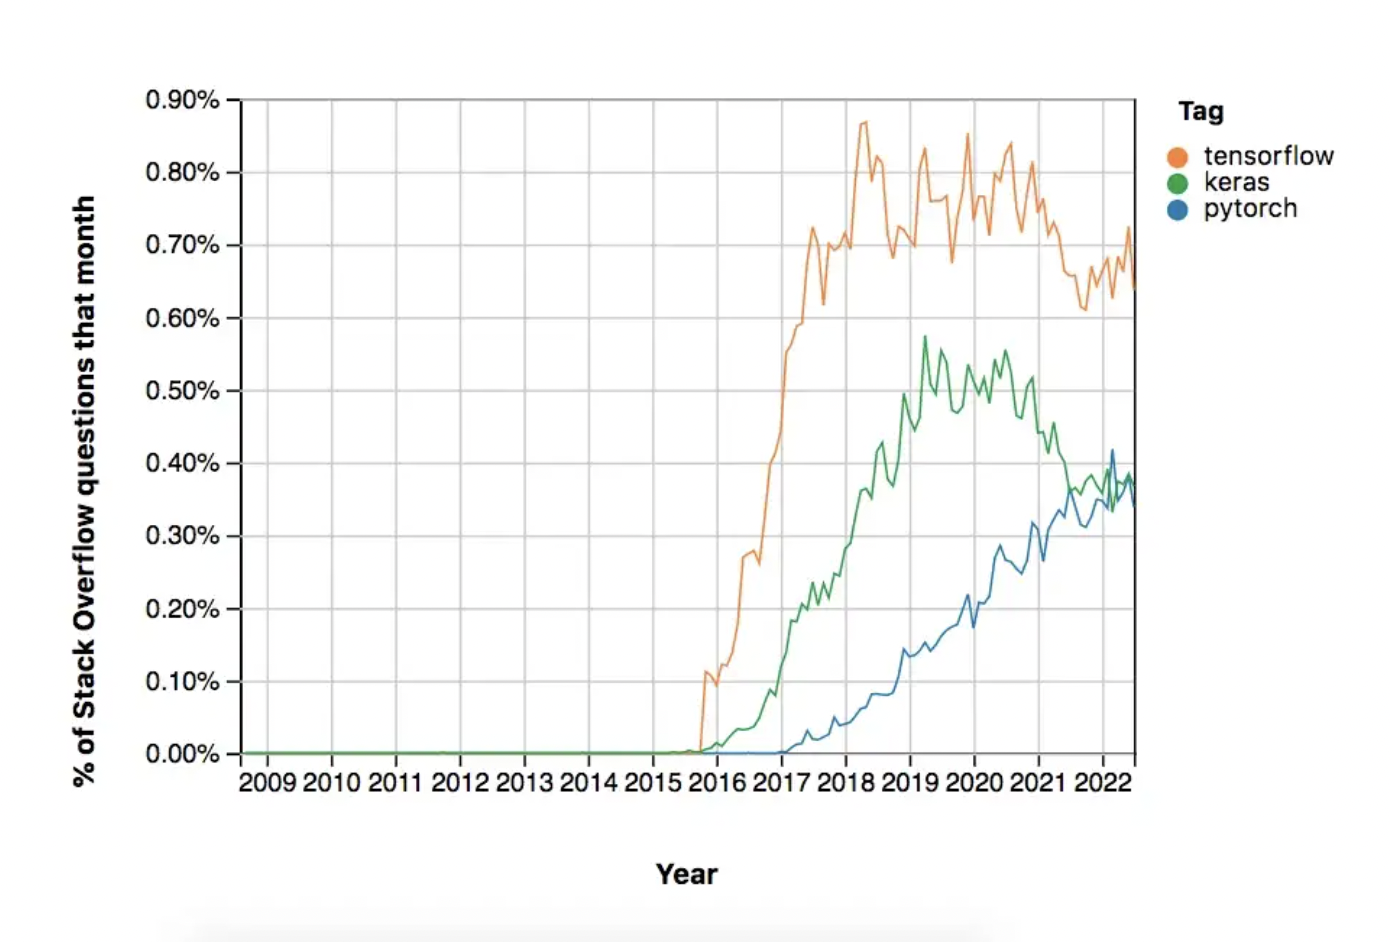 Graph showing percentage of StackOverflow tagged TensorFlow, Keras, and PyTorch over time